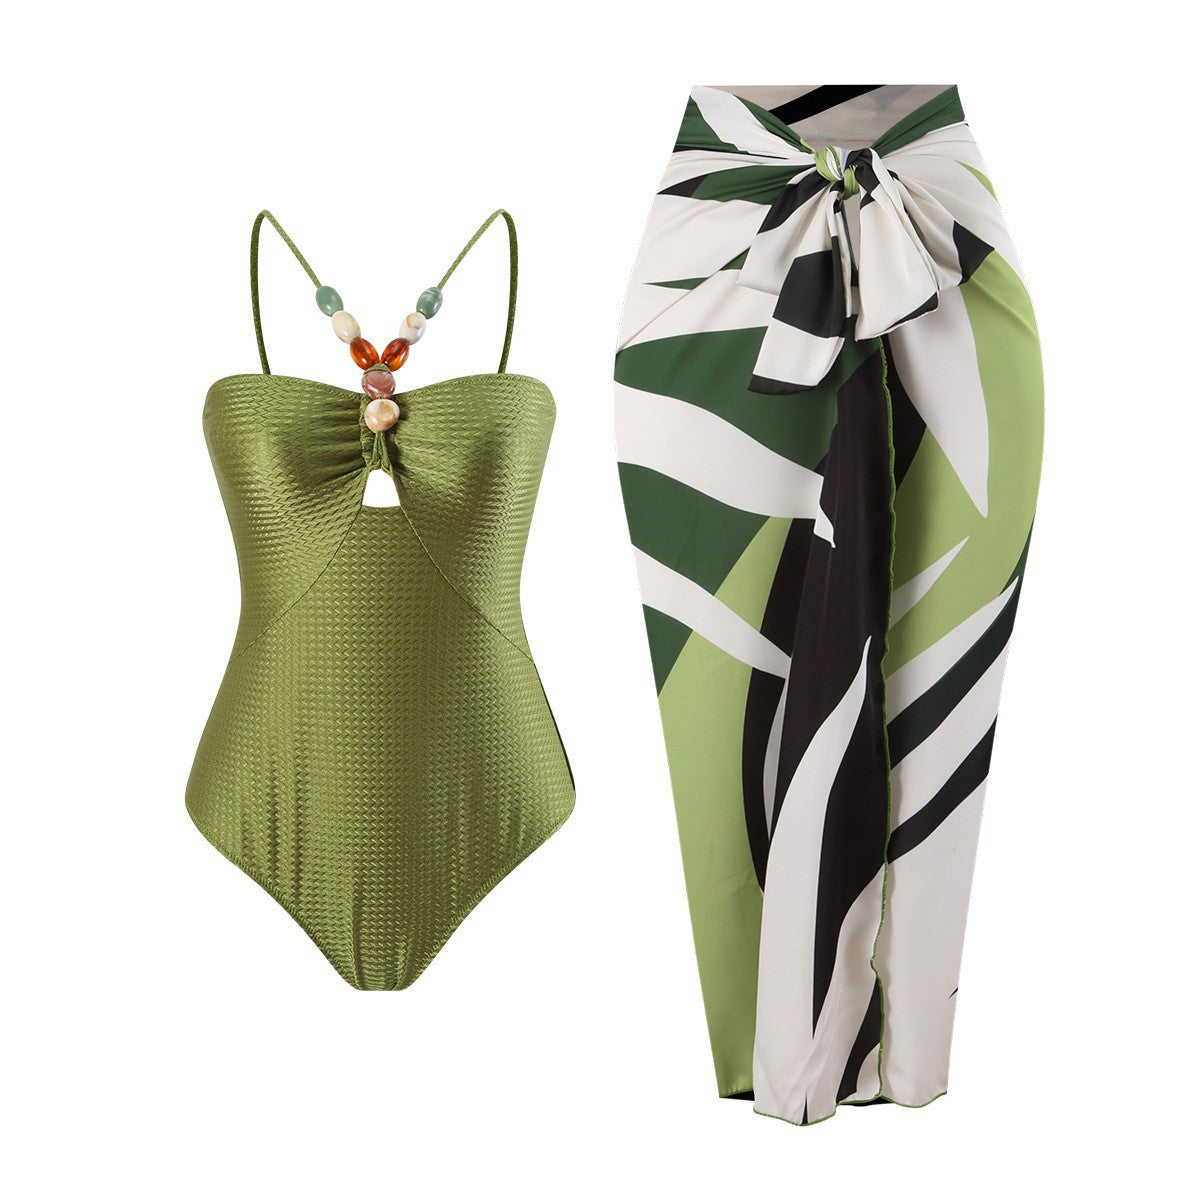 Ladies Swimsuit Multicolor Hollow Out Cutout Gem Sling French Two Piece Maxi Dress Swimsuit Bikini